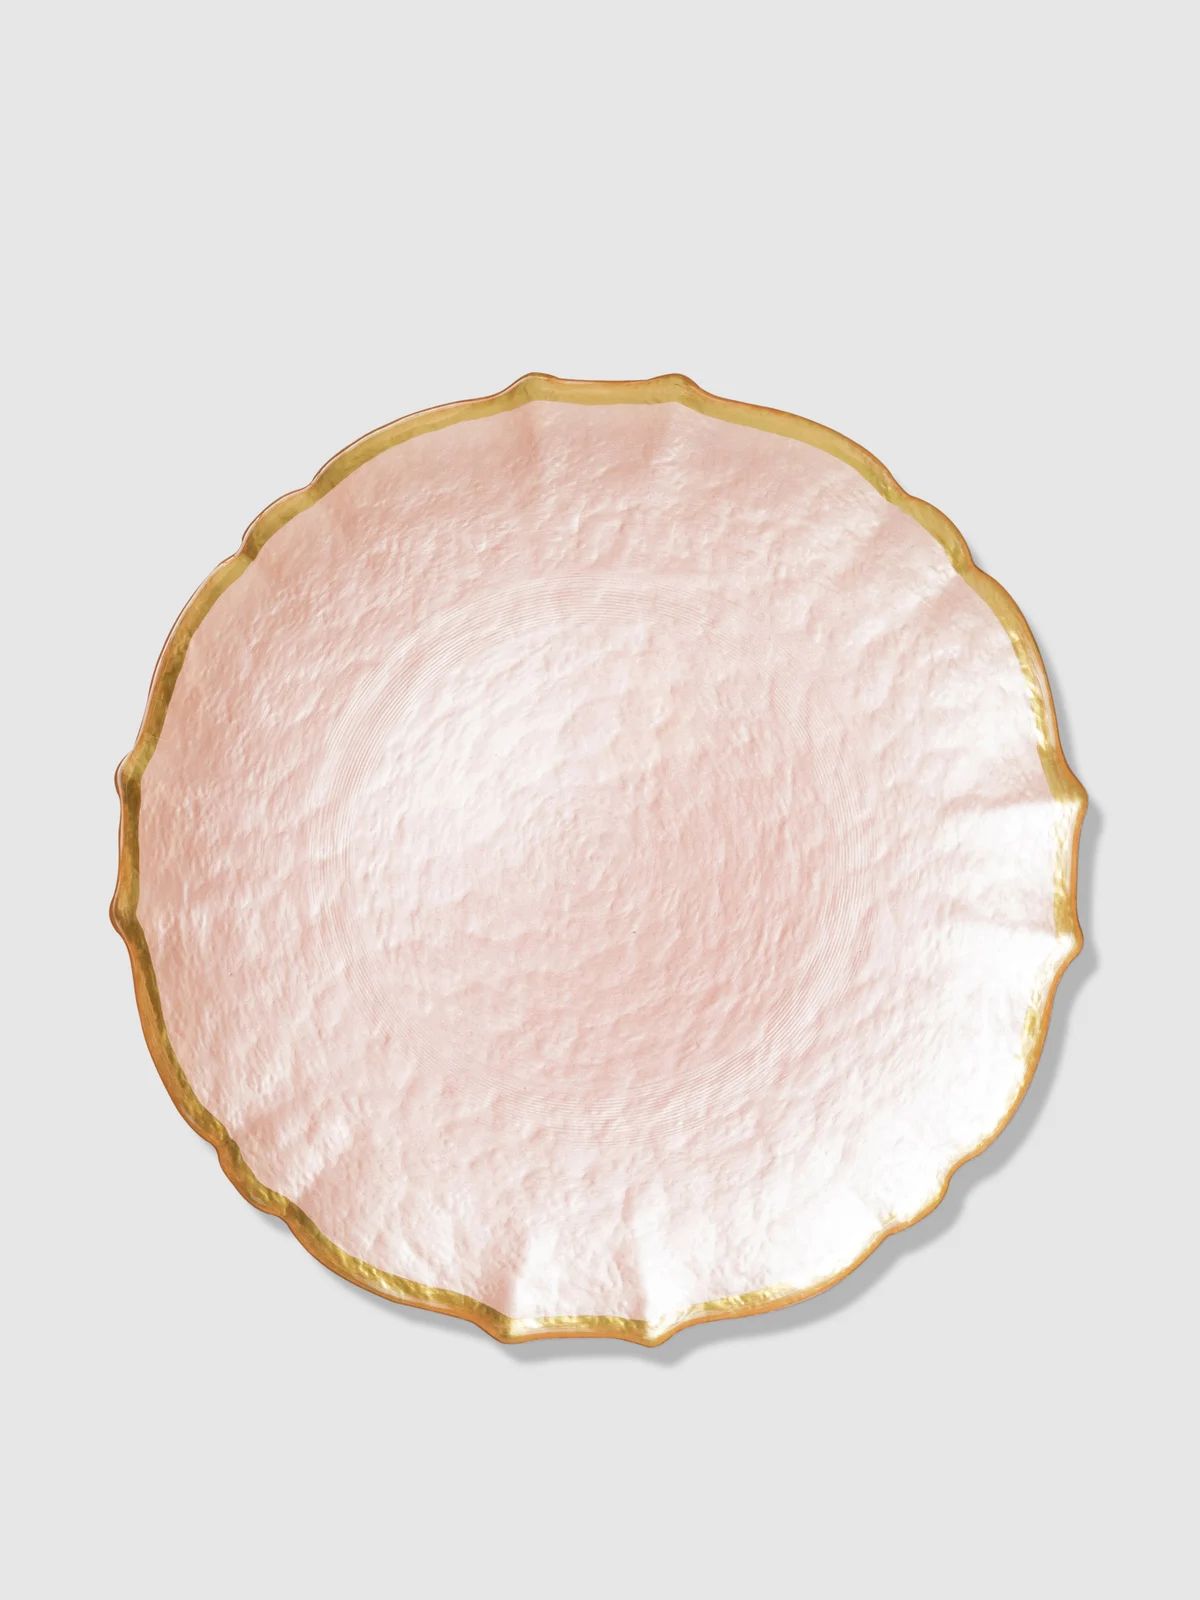 Baroque Glass Service Plate/Charger | Verishop